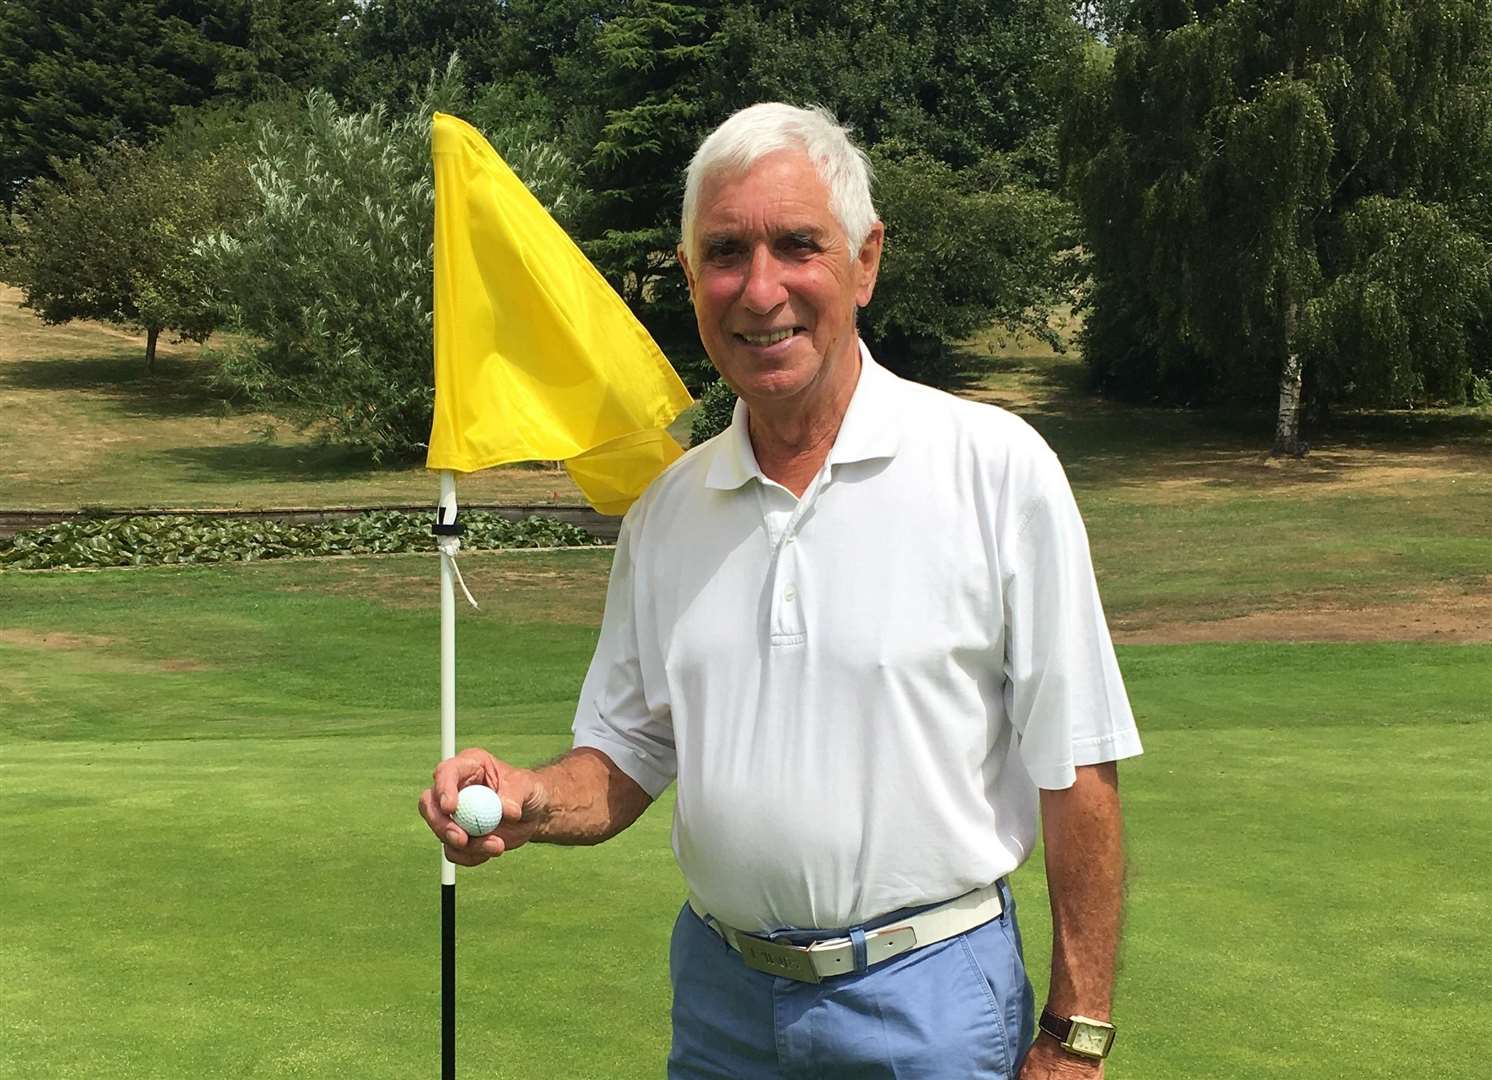 Roy Westcott hit a hole in one at Upchurch River Valley Golf Club, aged 84